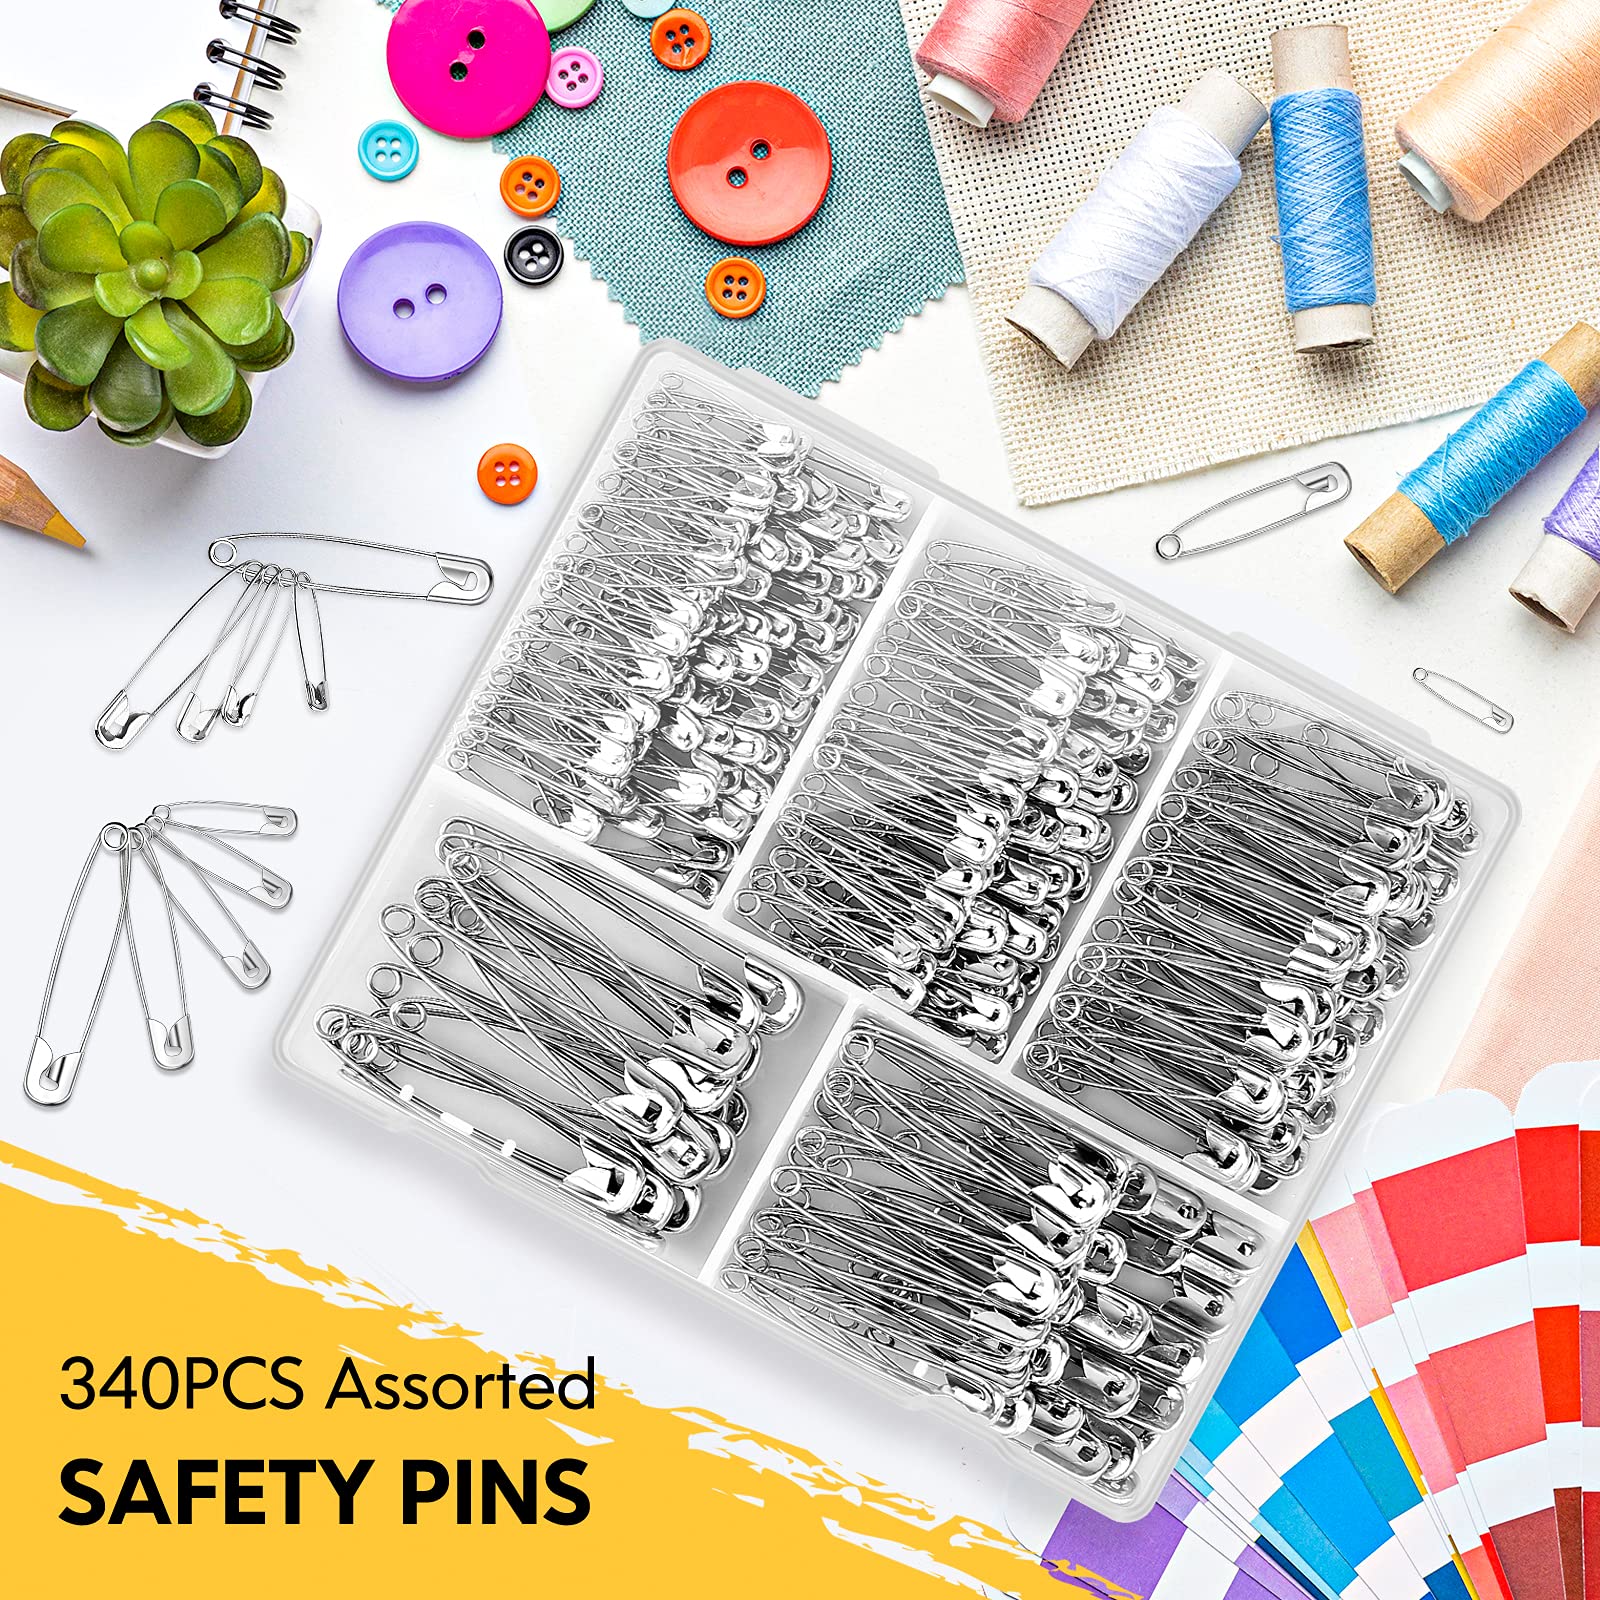 Safety Pins Assorted, 340 Pack Nickel Plated Steel Safety Pins Heavy Duty, 5 Different Sizes Safety Pin, Safety Pins Bulk, Small Large Safety Pins for Clothes, Sewing, Arts, Crafts (Silver)